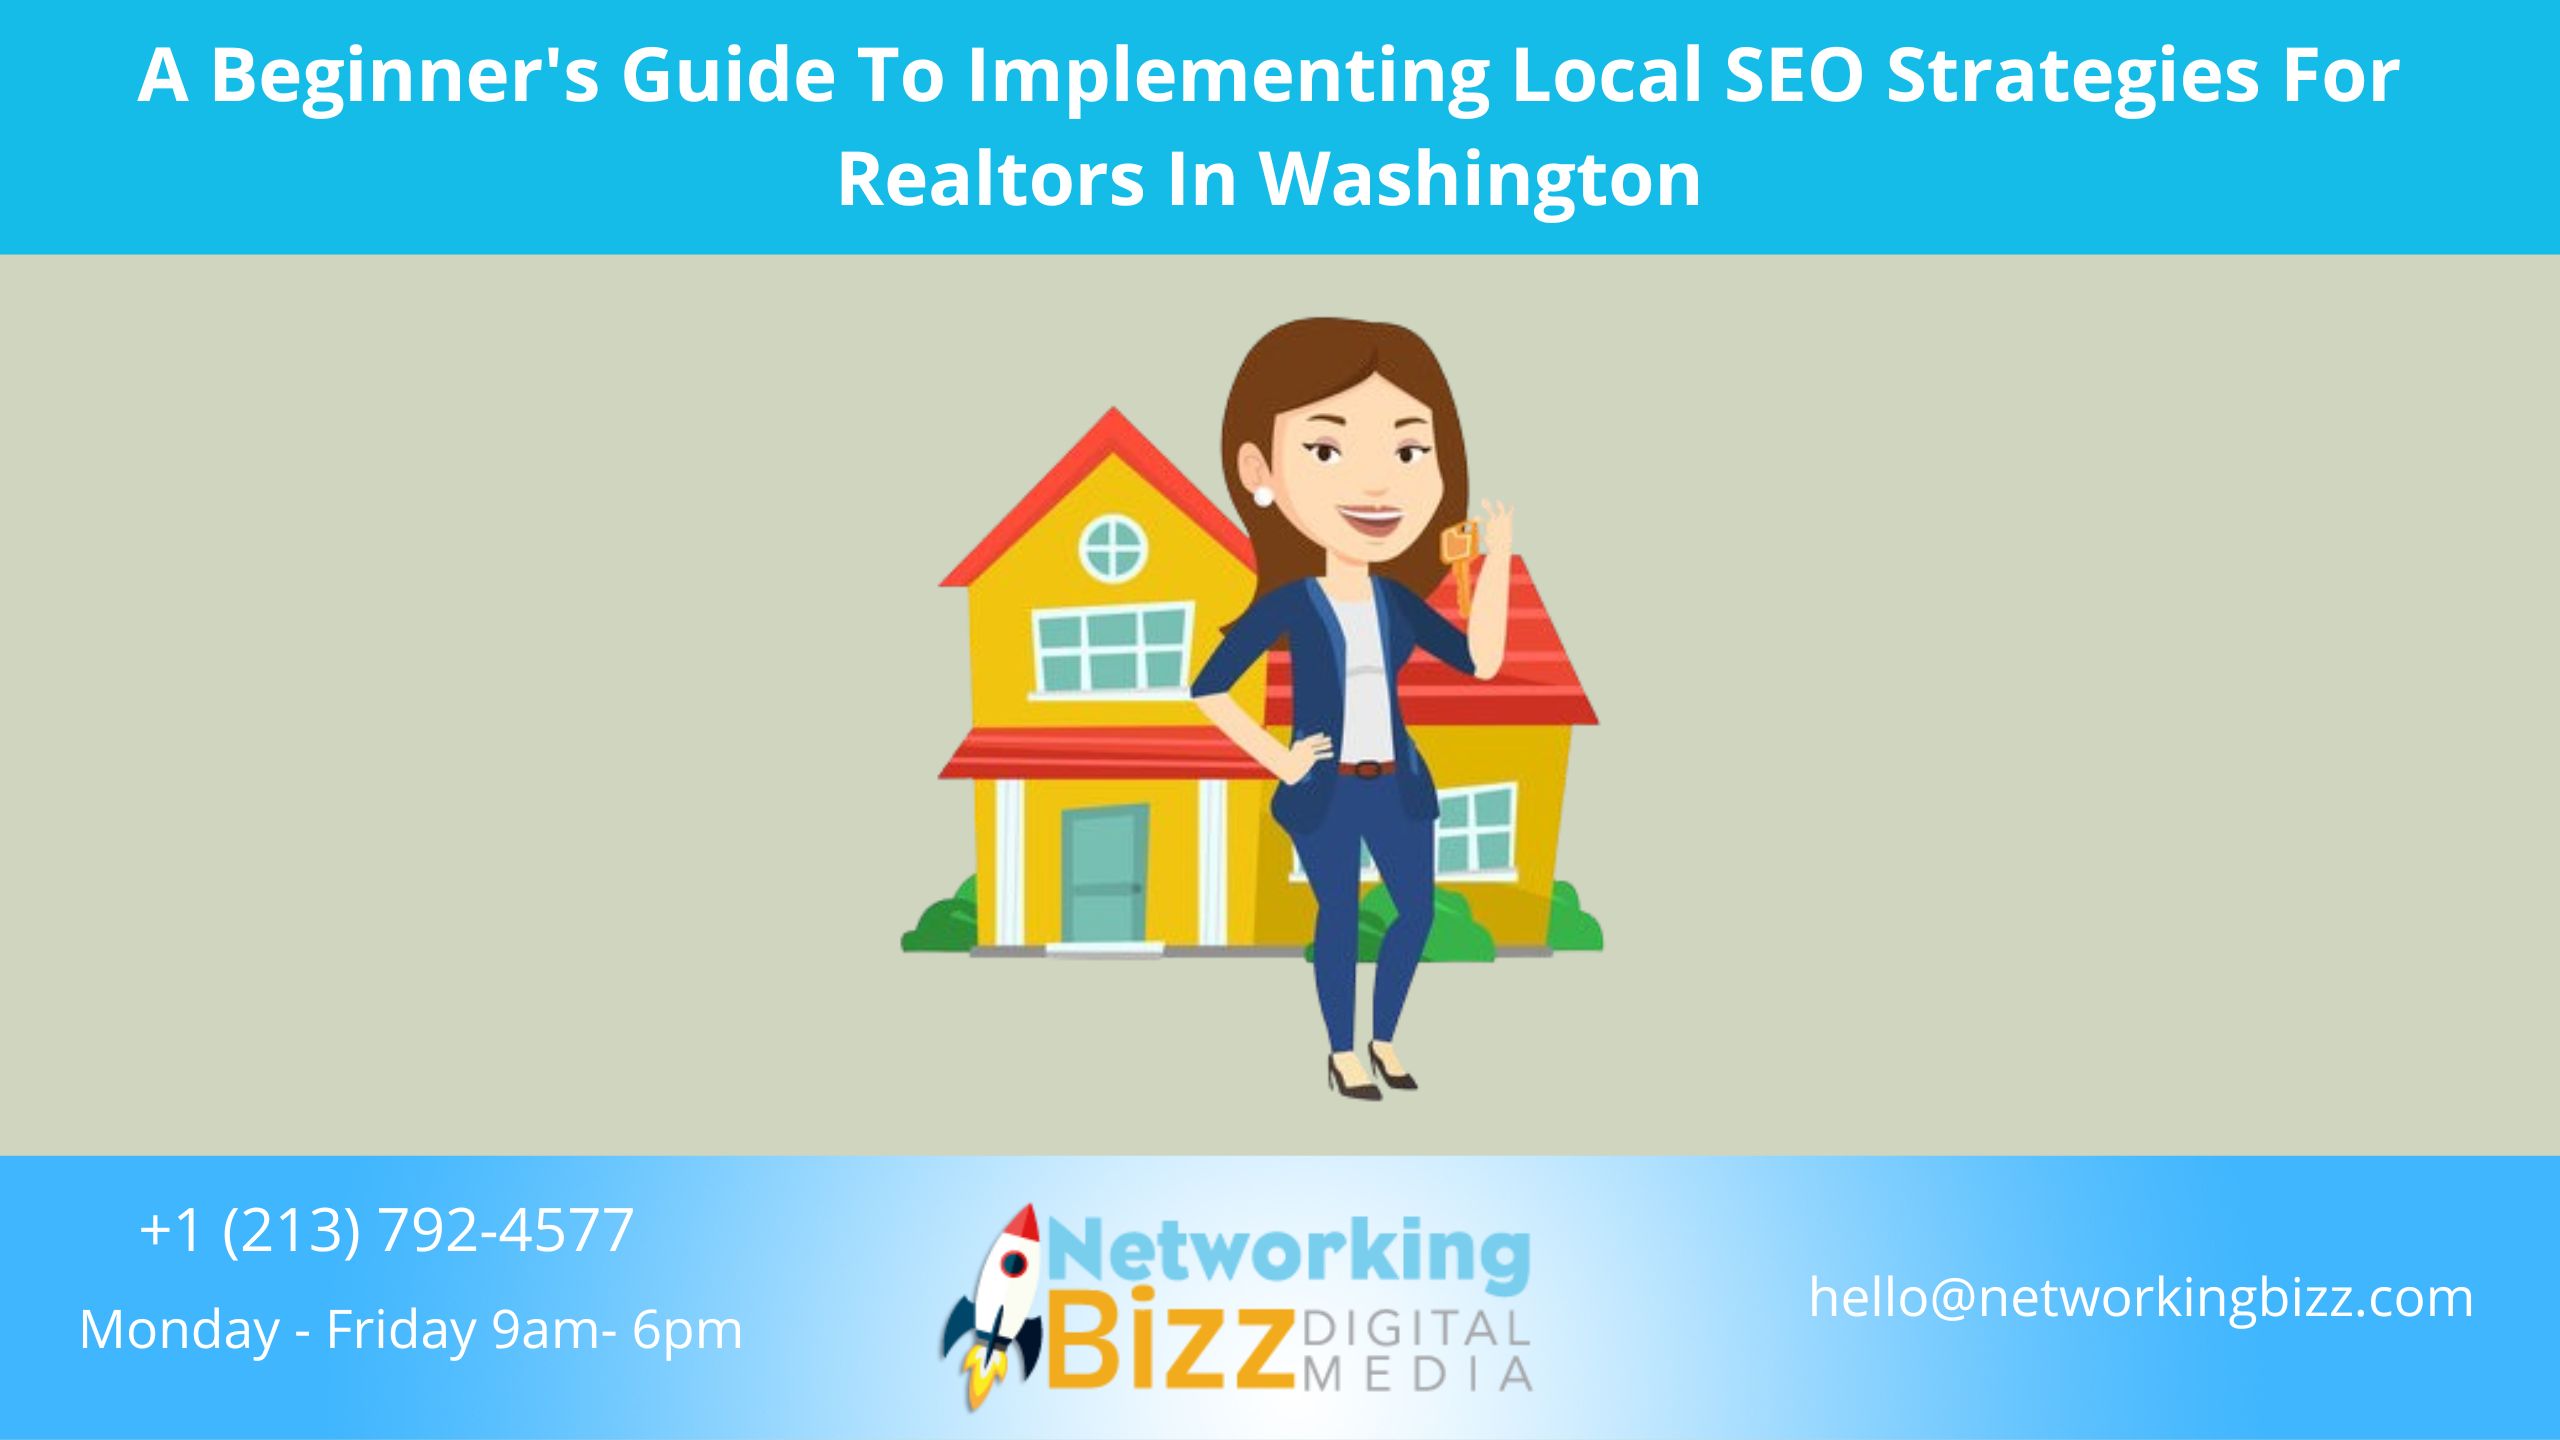 A Beginner’s Guide To Implementing Local SEO Strategies For Realtors In Washington